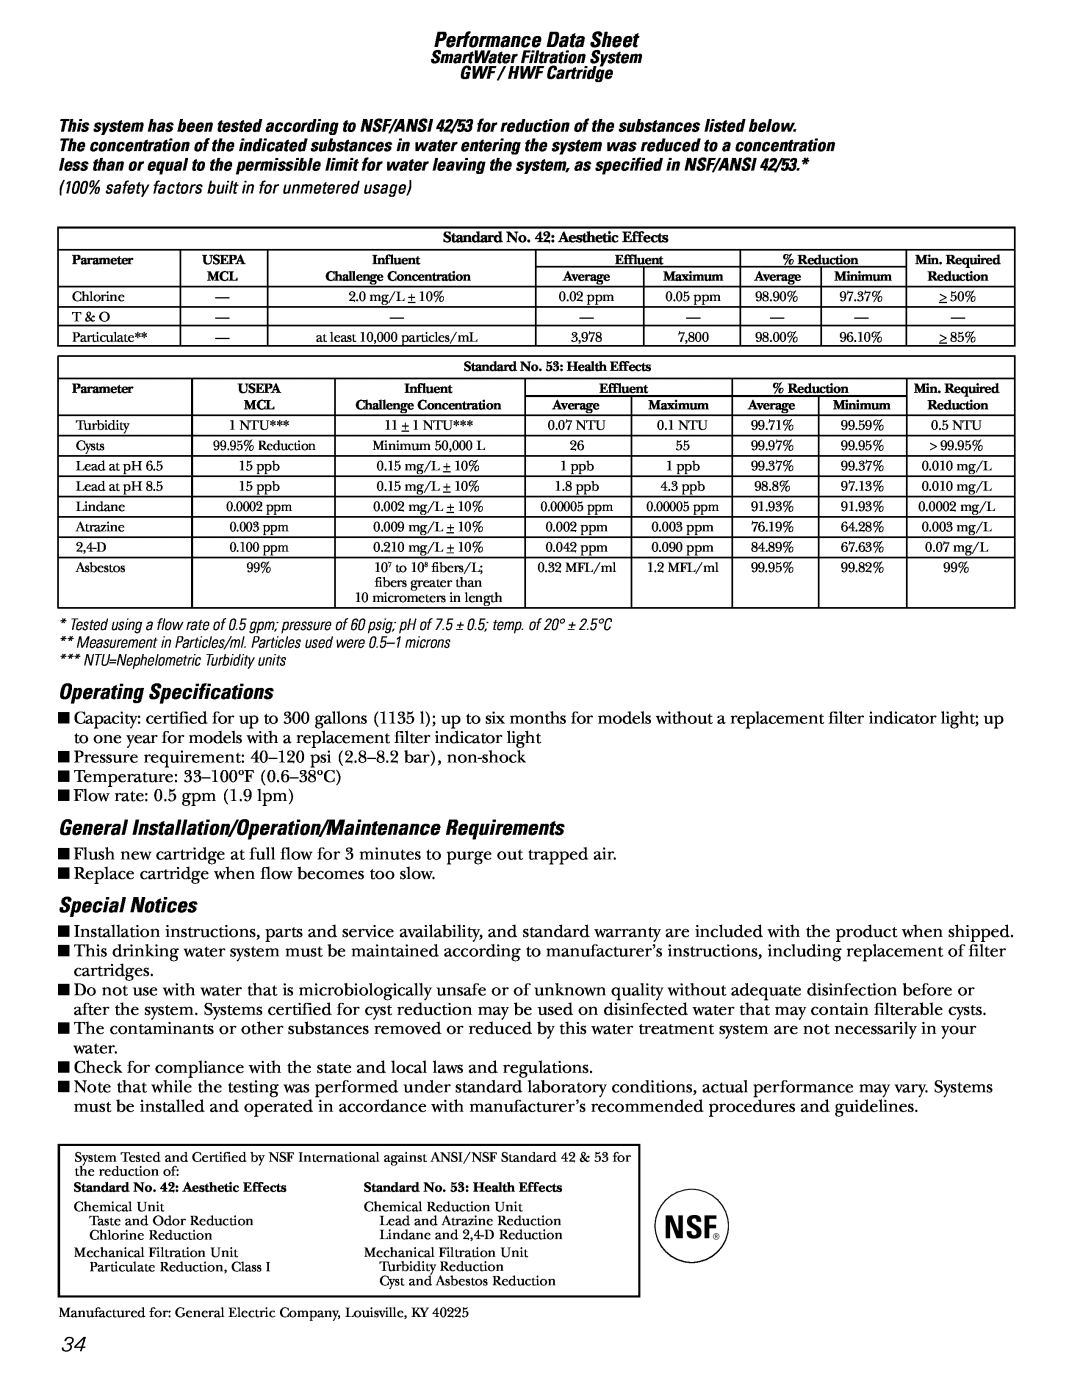 GE 200D26000P022 Performance Data Sheet, Operating Specifications, General Installation/Operation/Maintenance Requirements 